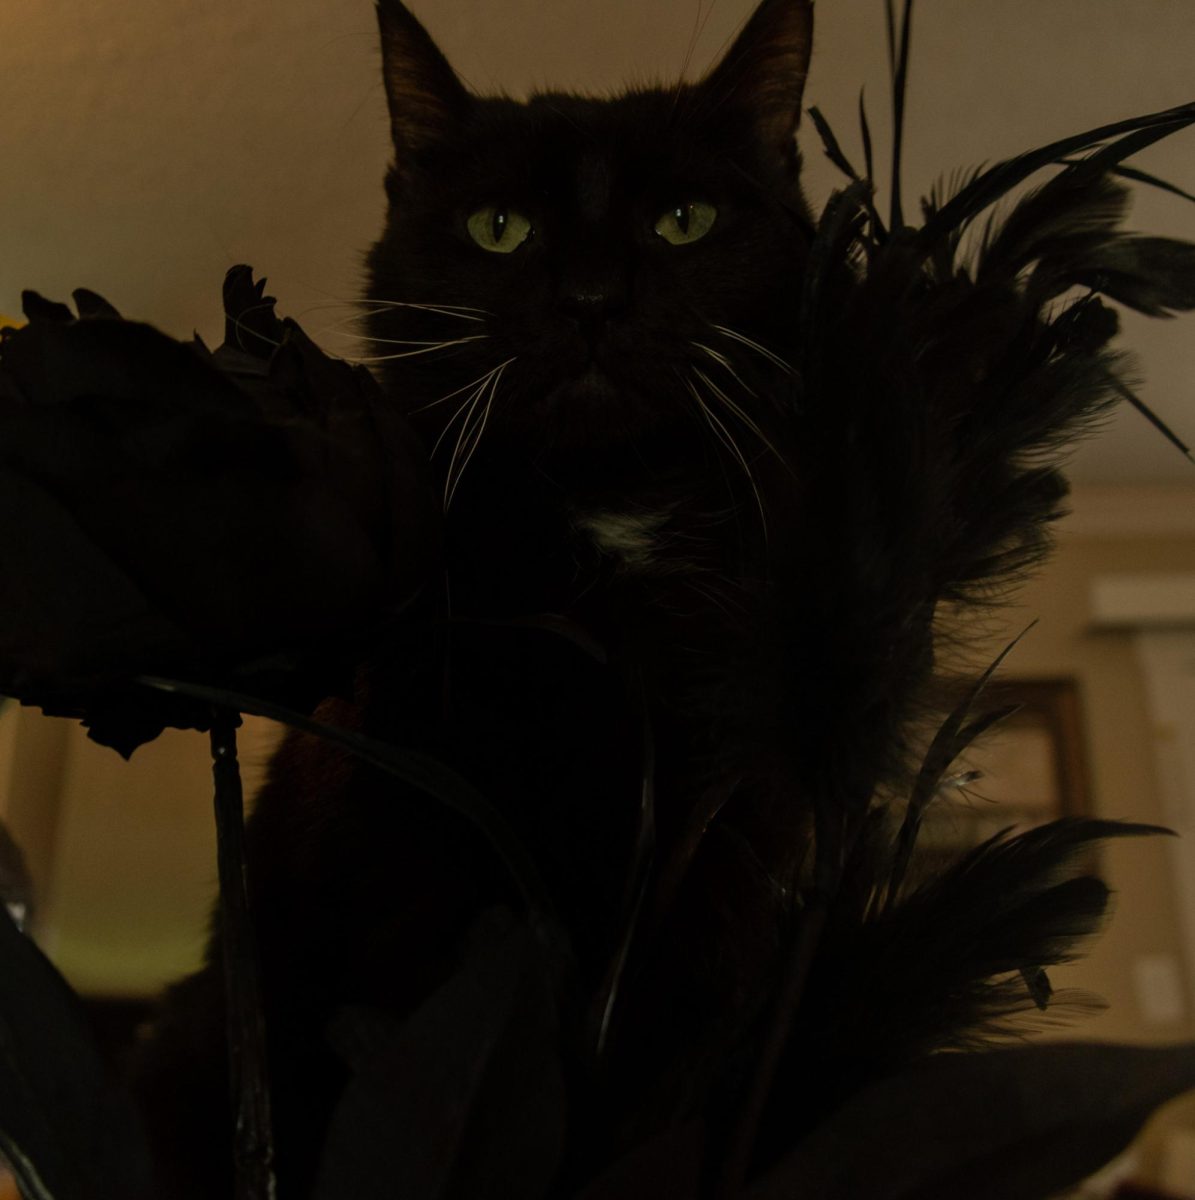 This photo represents the color black in nature. In this picture the black cat, Peyton, stares above the camera. There are also black flowers framing Peyton’s face. 